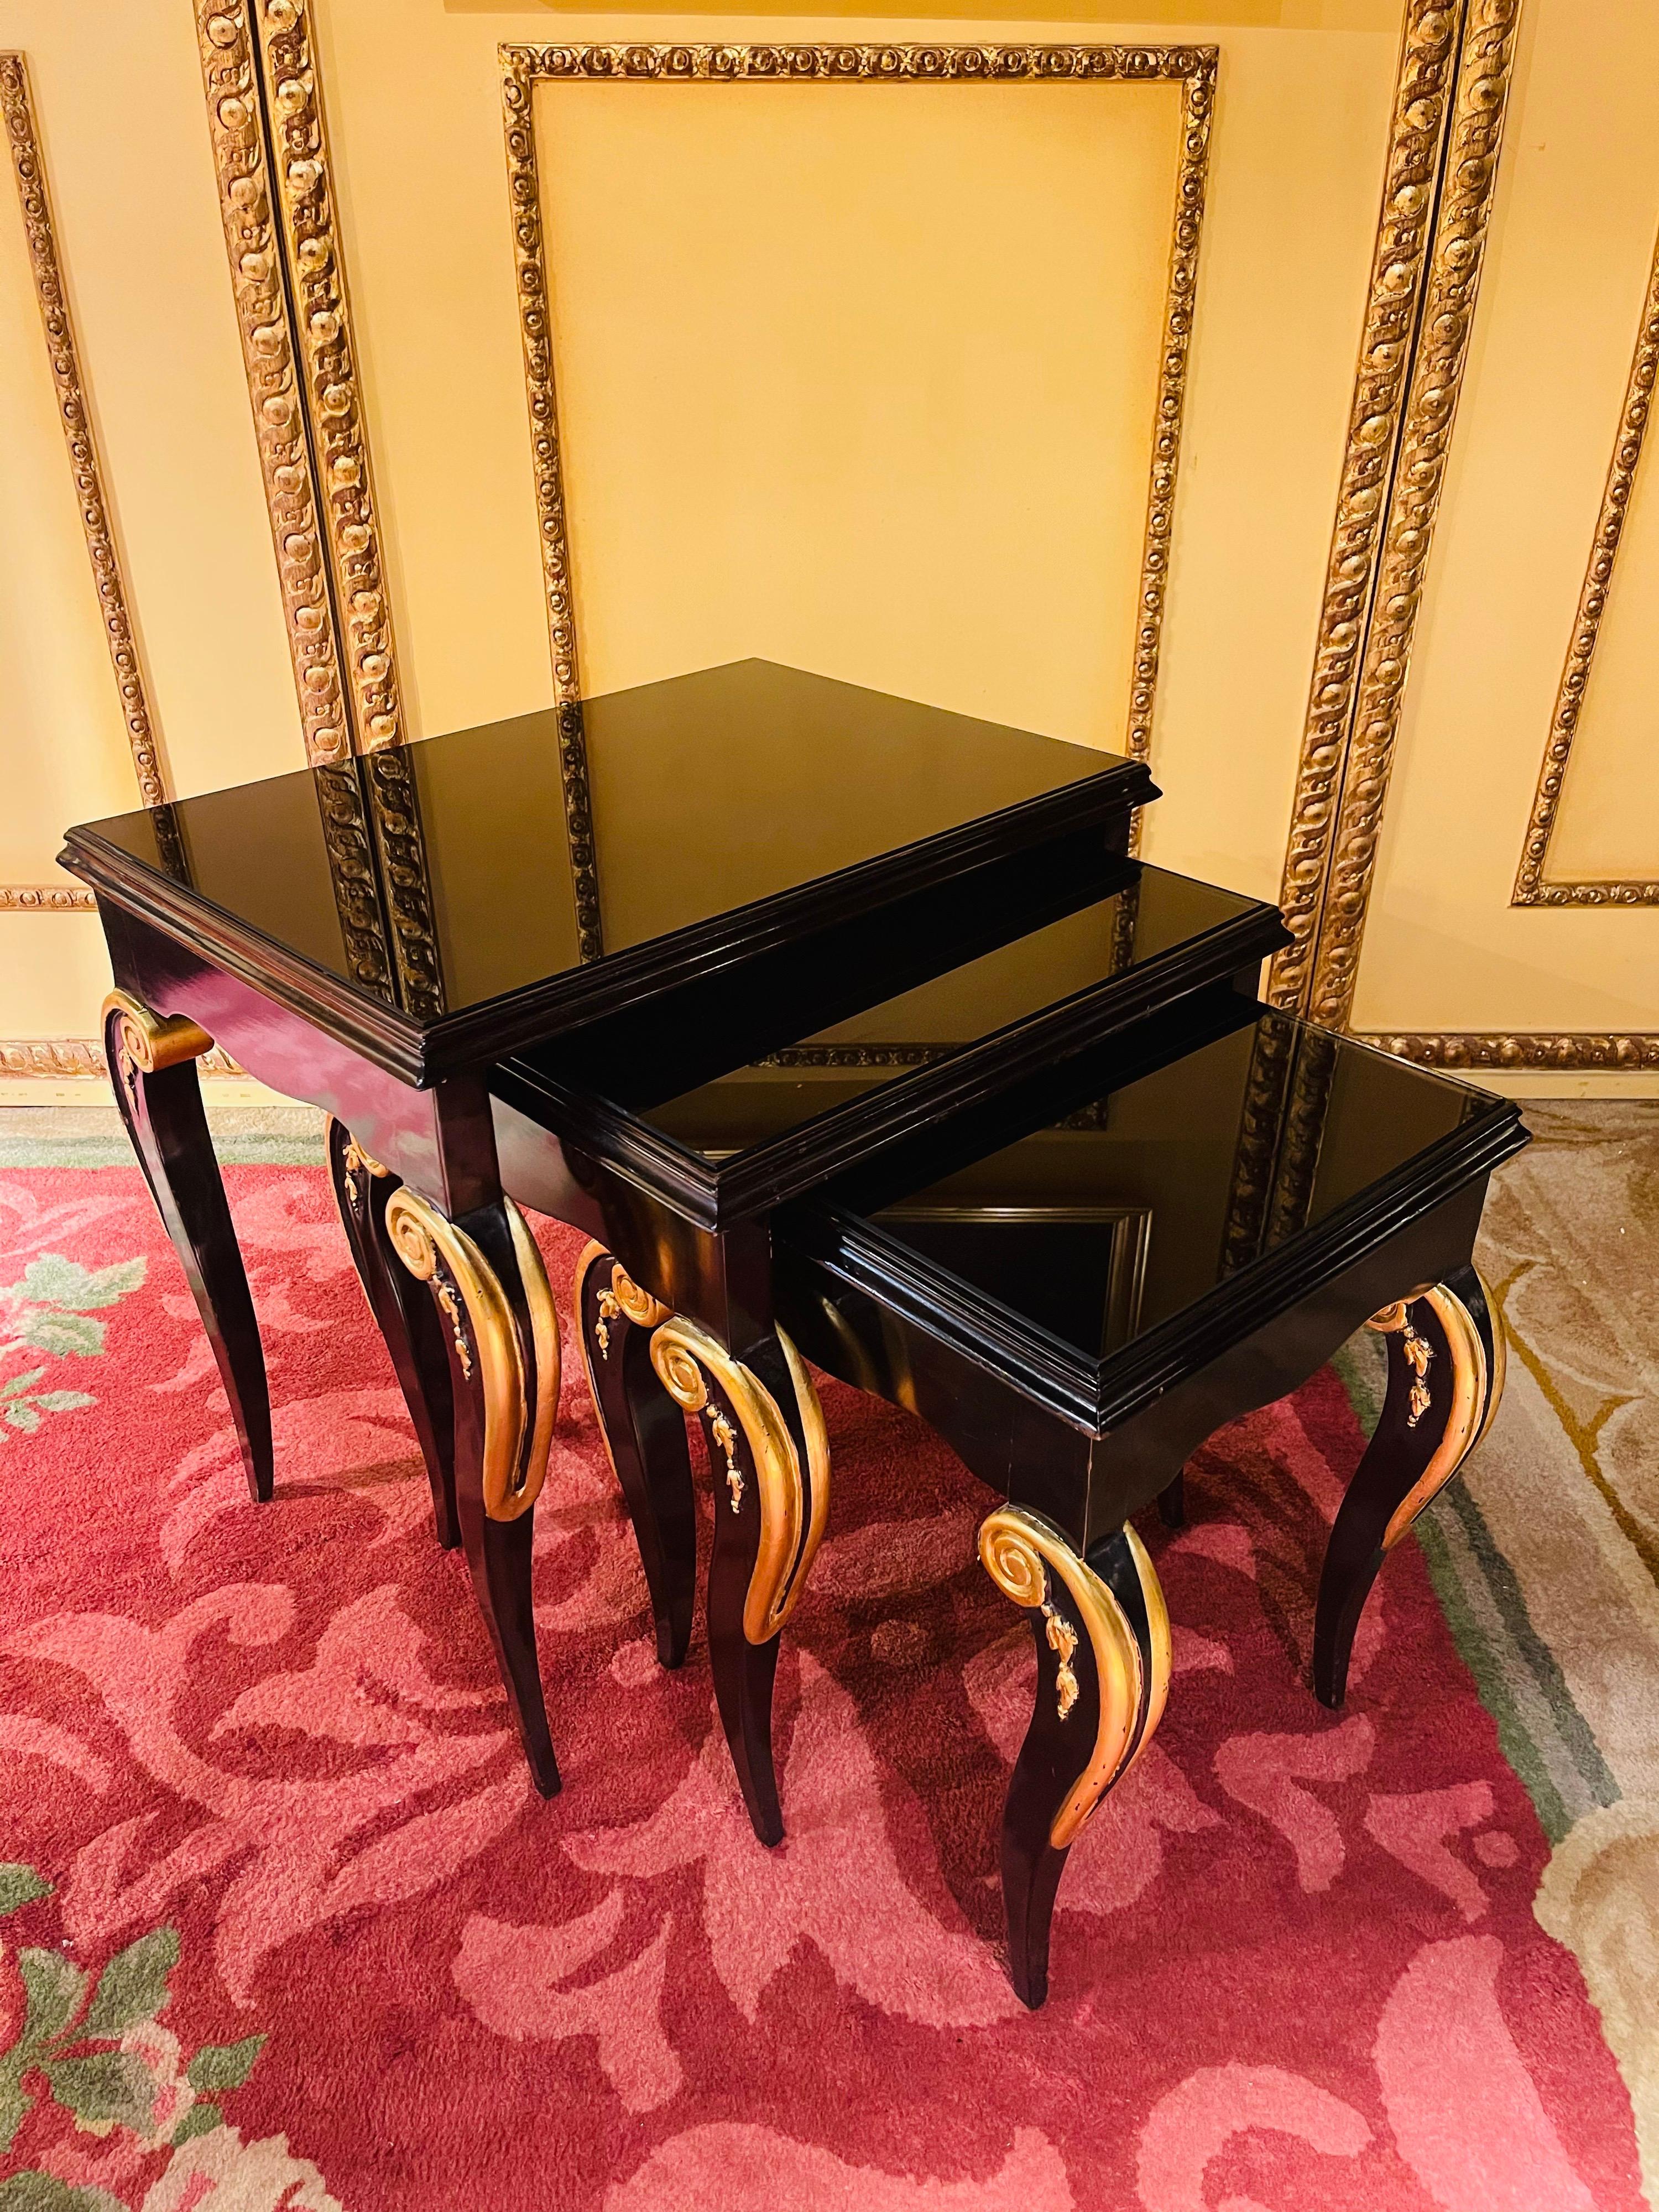 Set of designer 4 side table in Empire style

Solid beechwood black painted and partially gilded. Curved frame on curly long legs White taken. tabletop in black tinted, thick glass. The side table set is tiered and fits into each other. Classic,